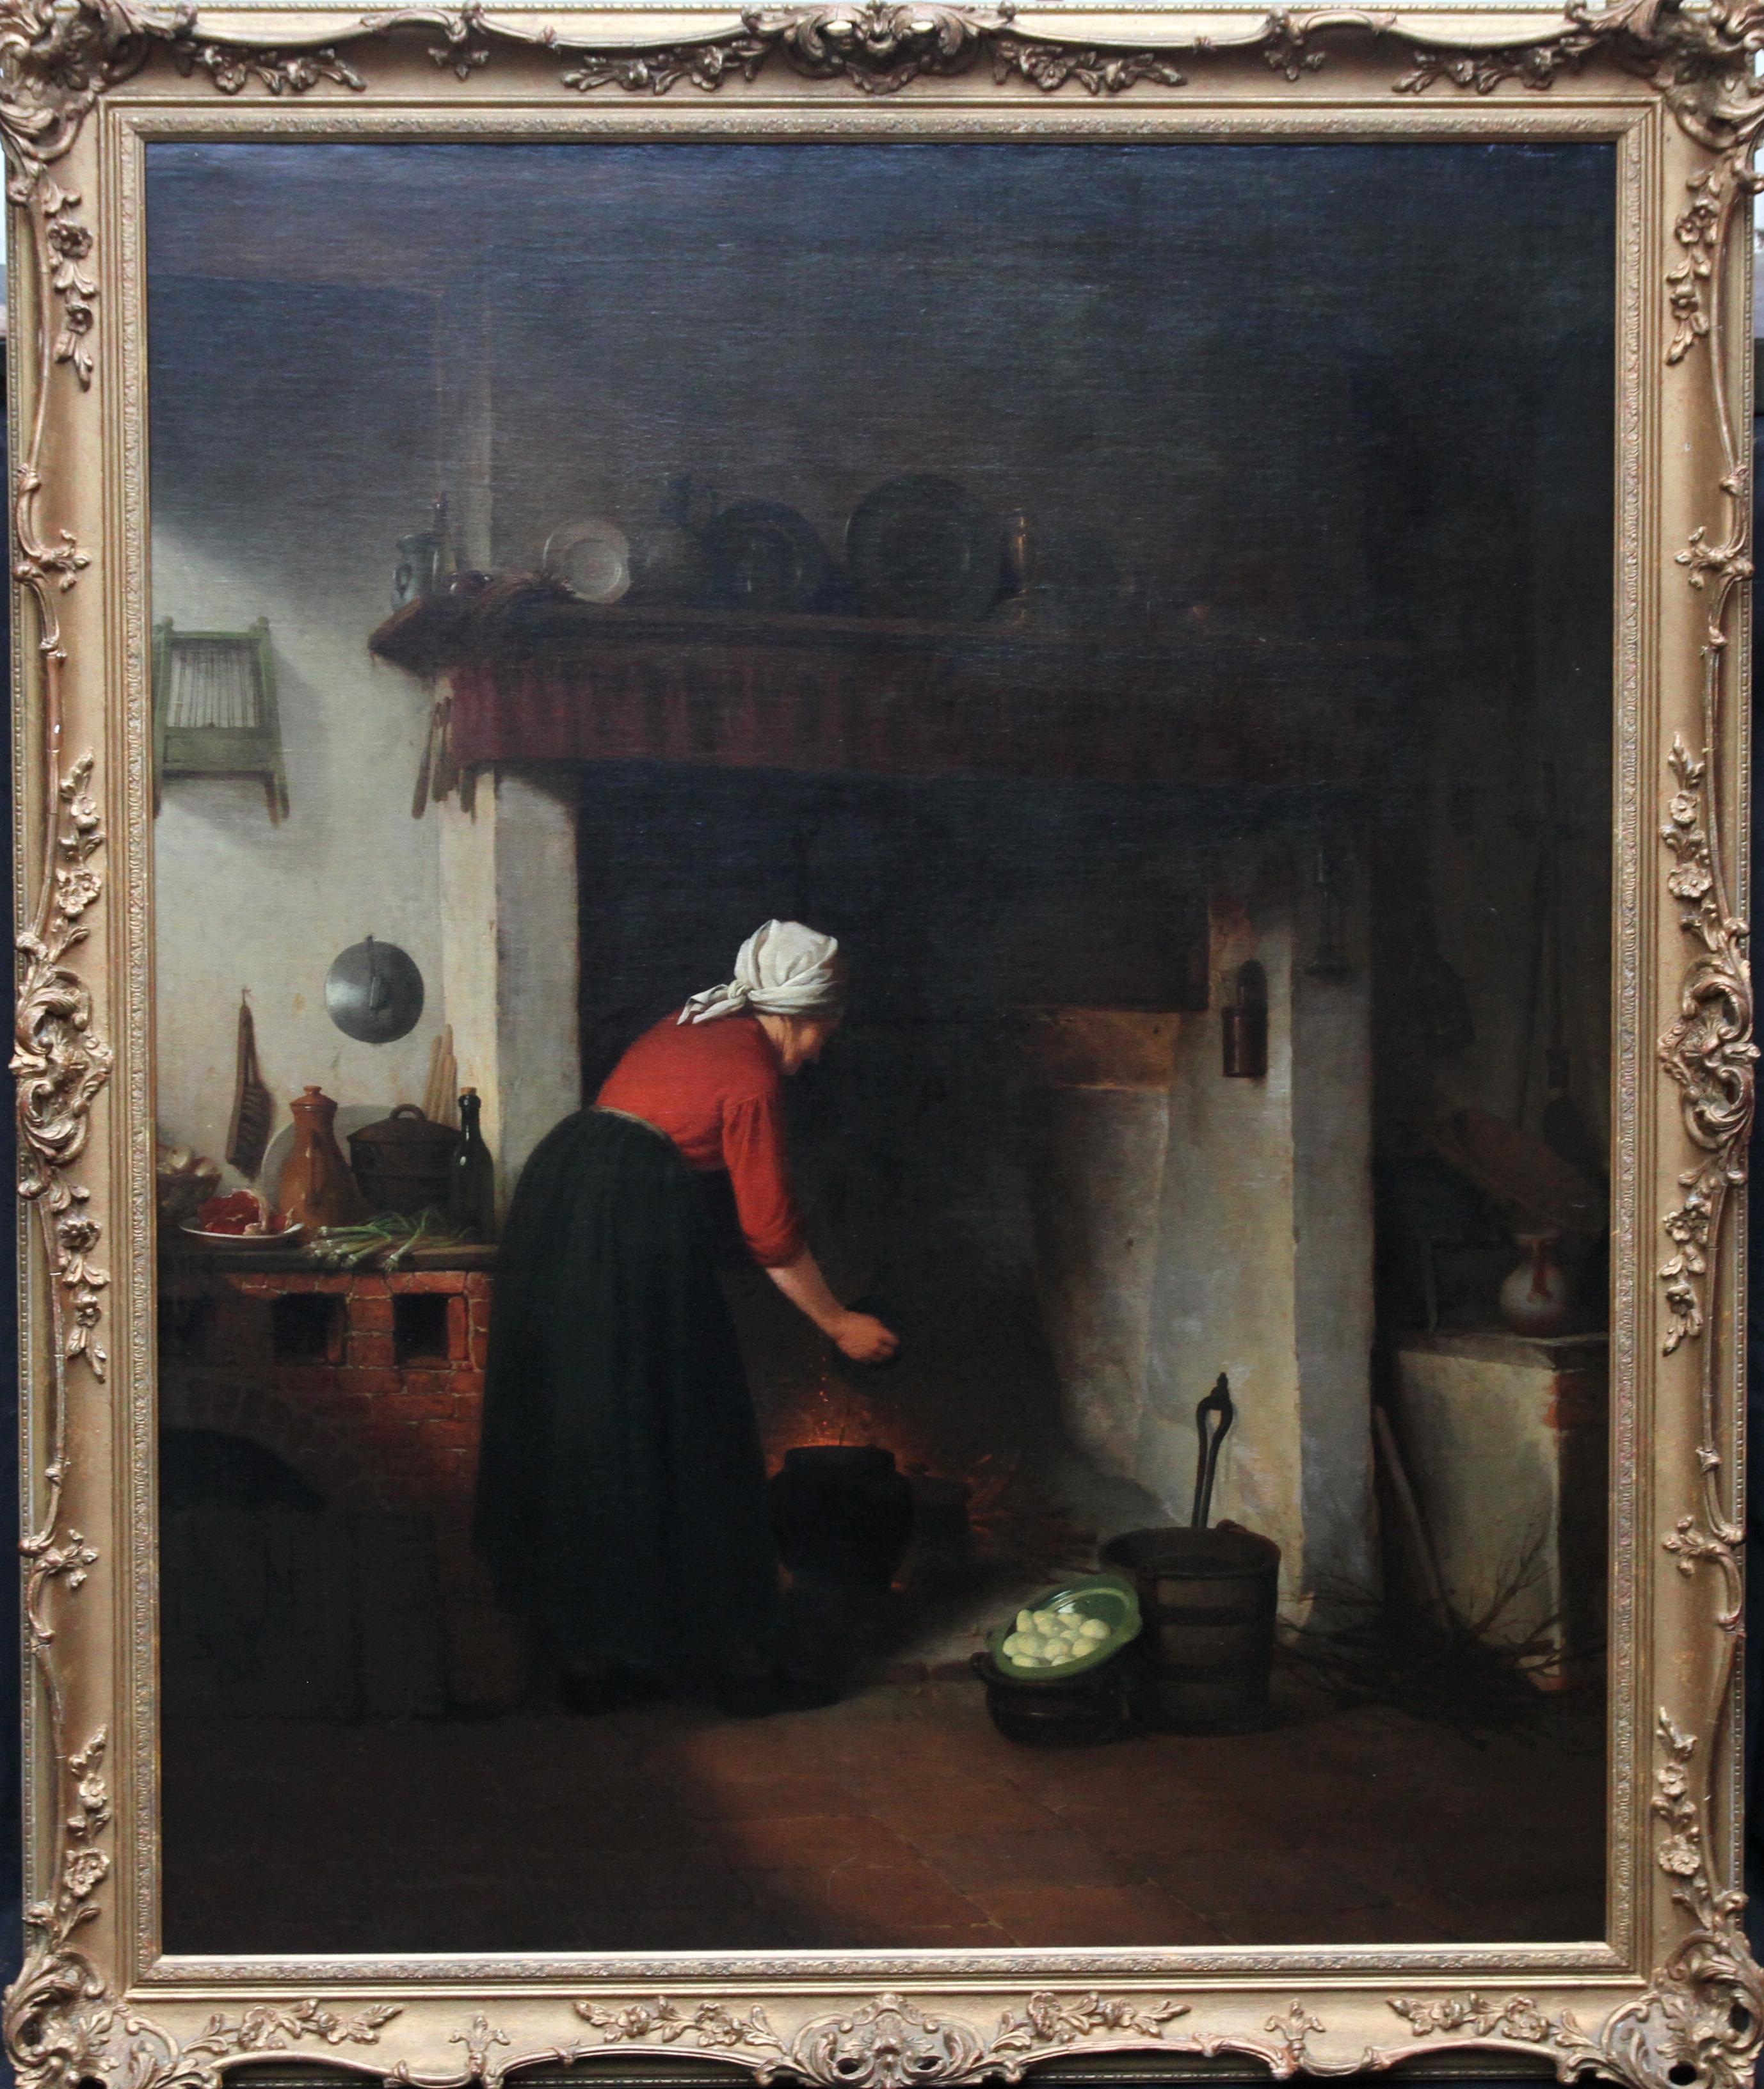 Woman Cooking in a Cottage Interior - Dutch Victorian genre art oil painting 8